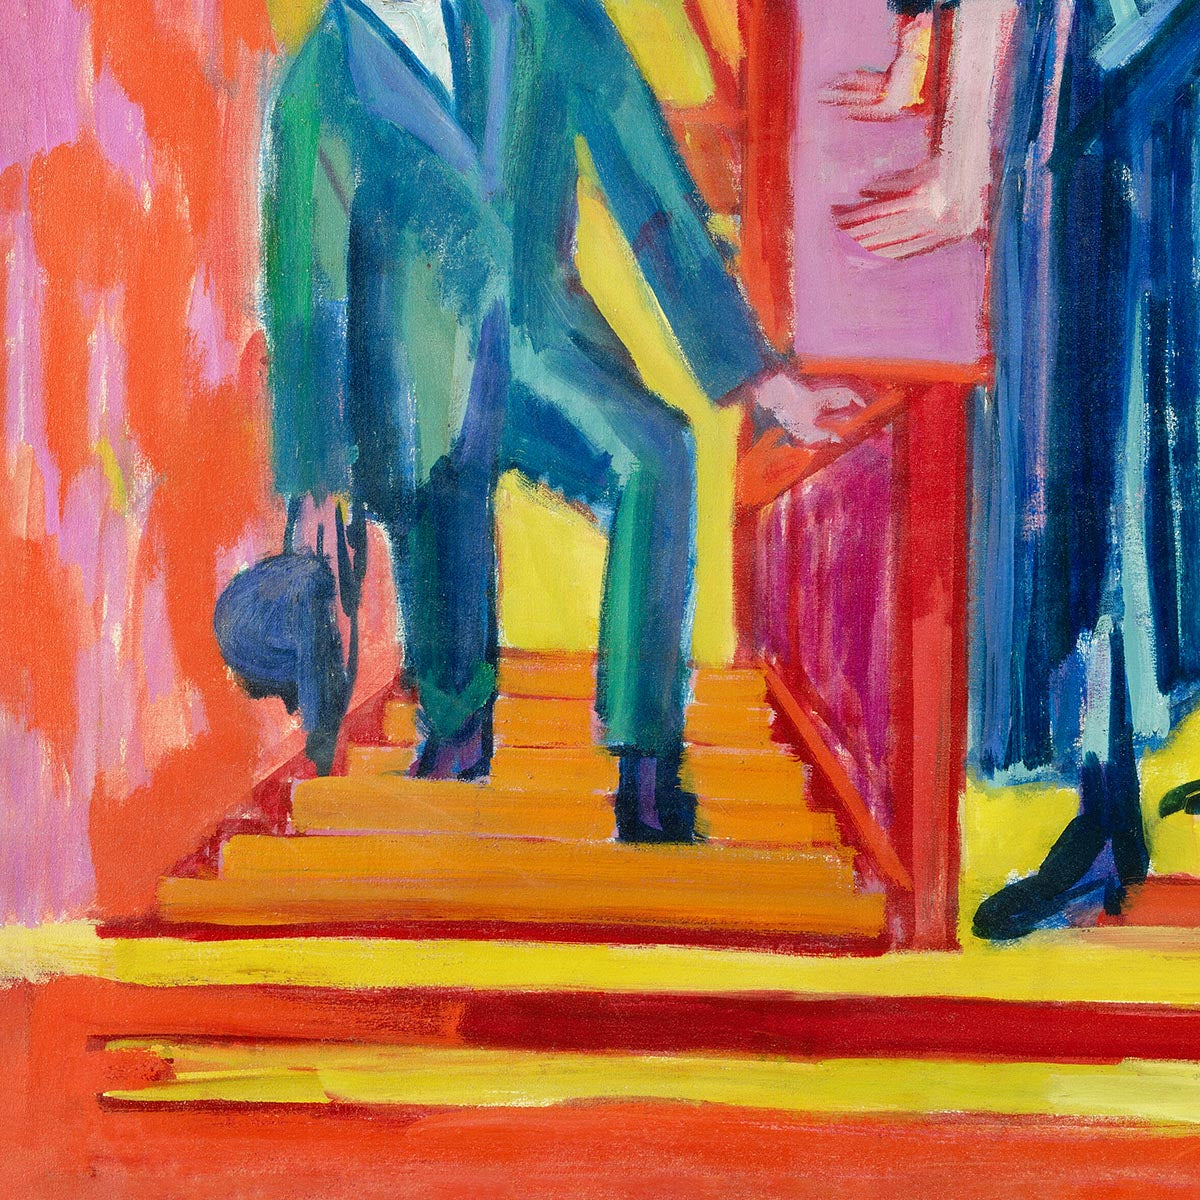 The Visit - Couple and Newcomer by Ernst Kirchner